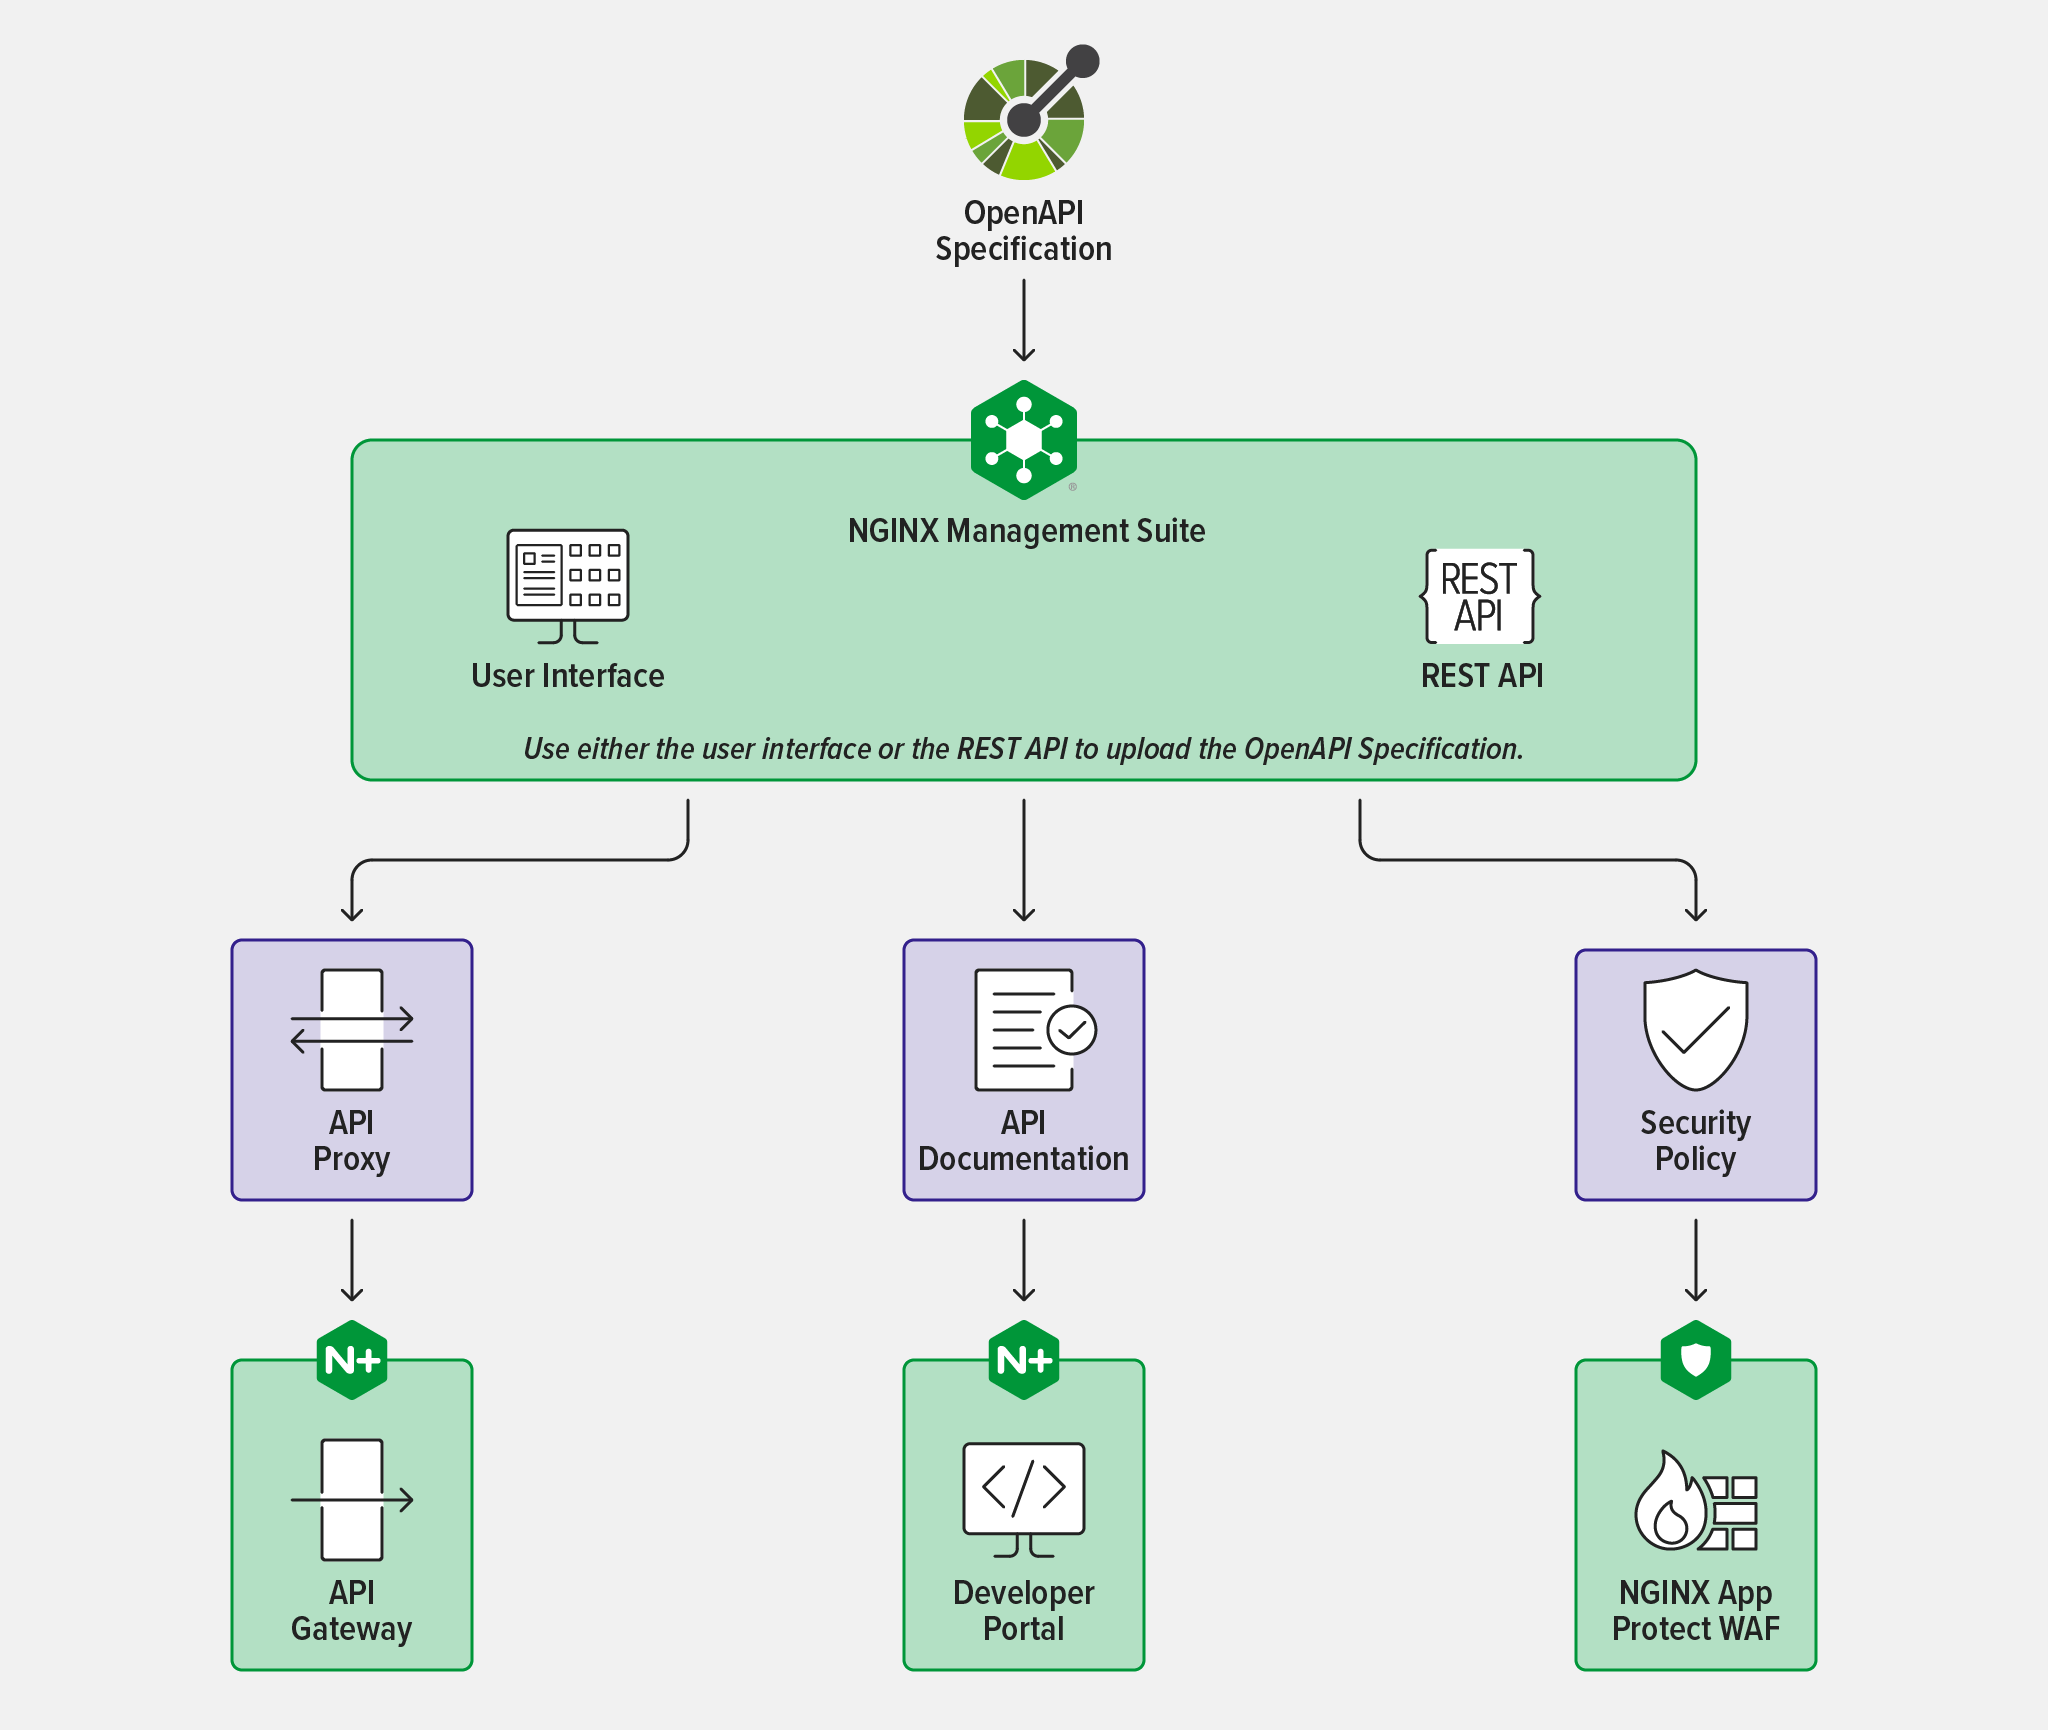 Diagram showing how API Connectivity Manager leverages an OpenAPI Specification for three uses: publishing the API to an API gateway, publishing documentation at the developer portal, and setting security policies on a WAF